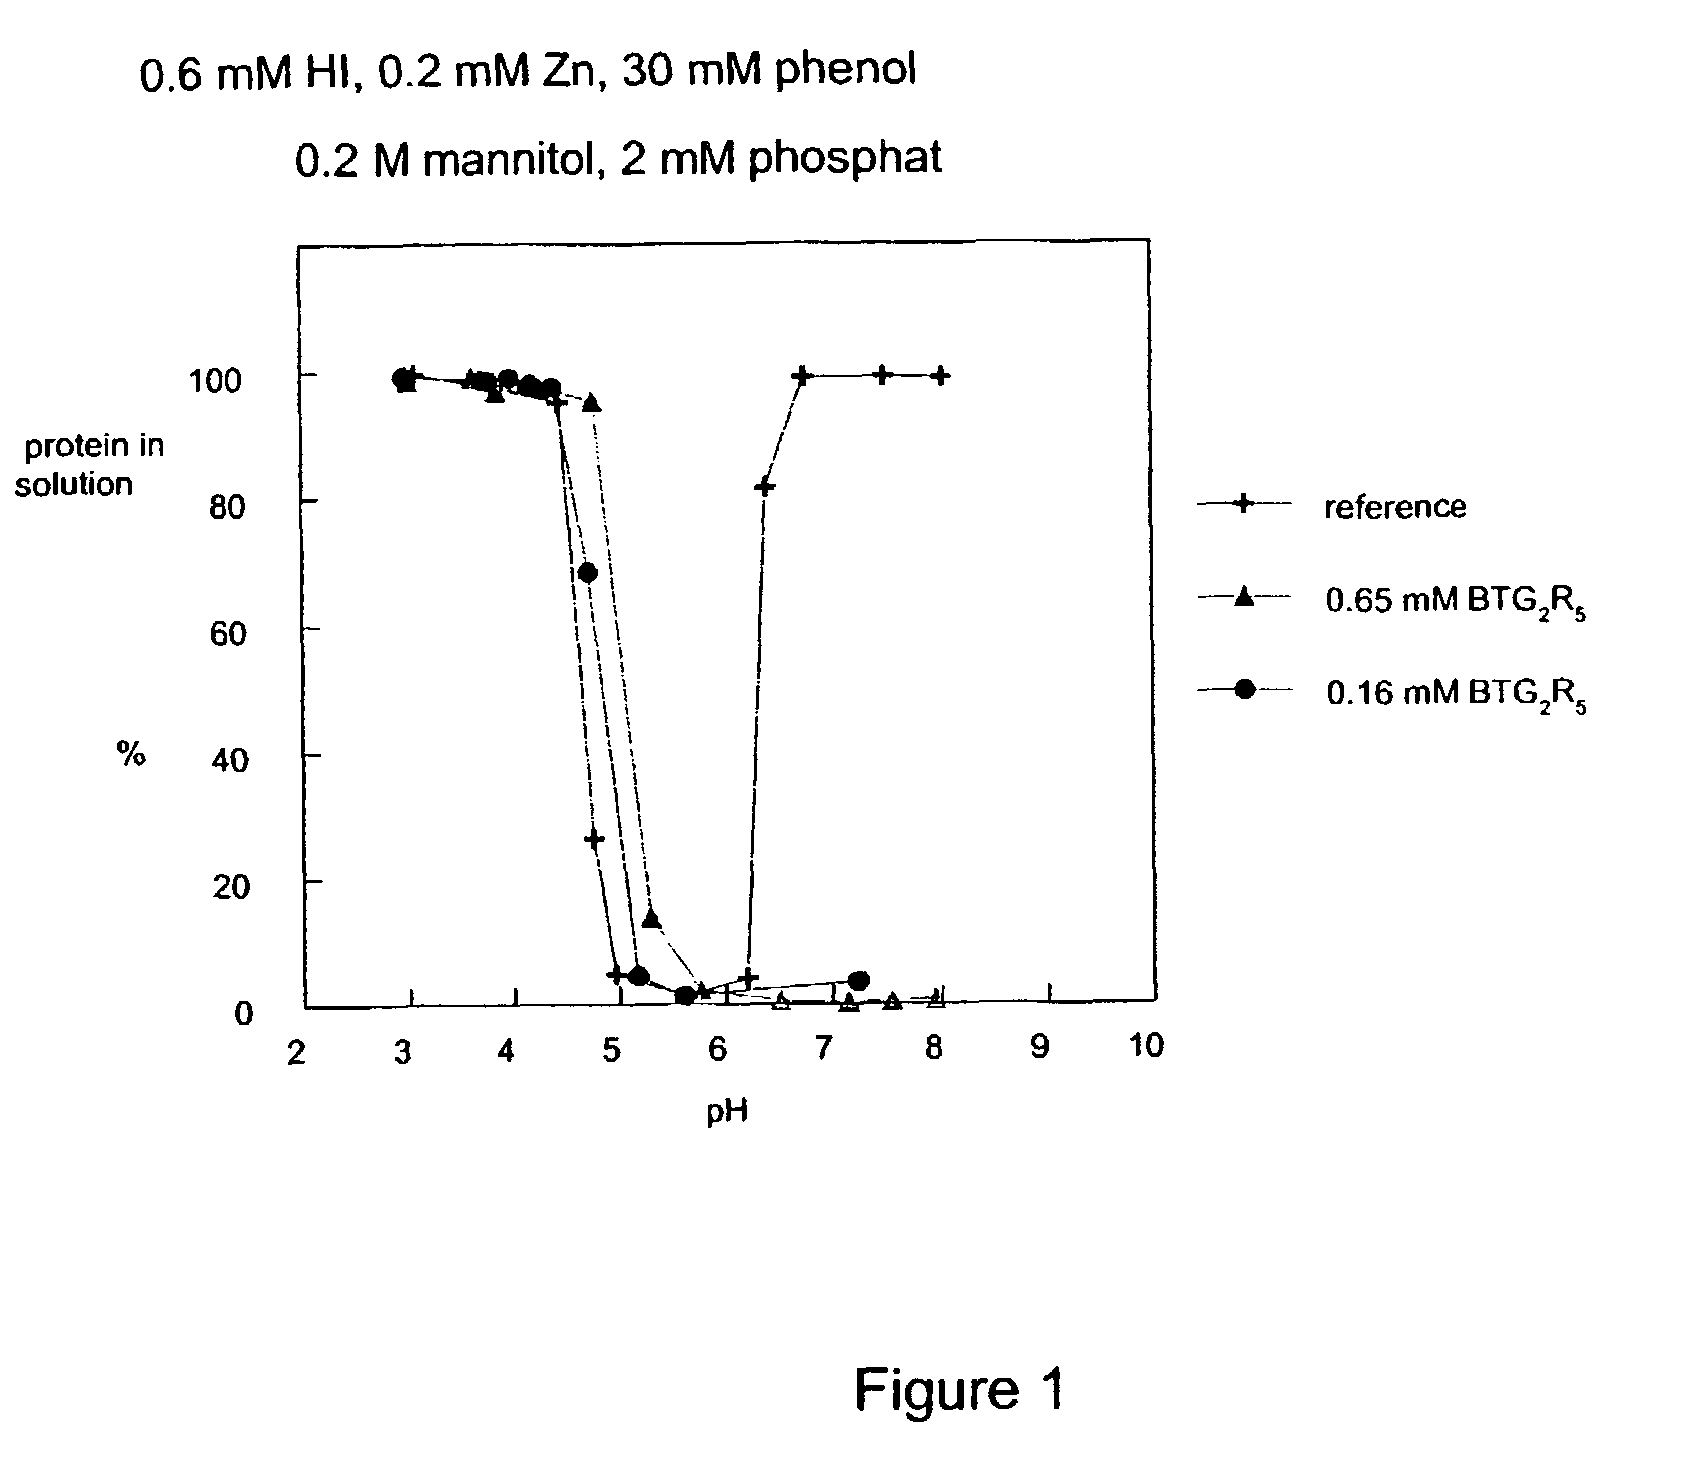 Ligands for the HisB10 Zn<sup>2 + </sup>sites of the R-state insulin hexamer